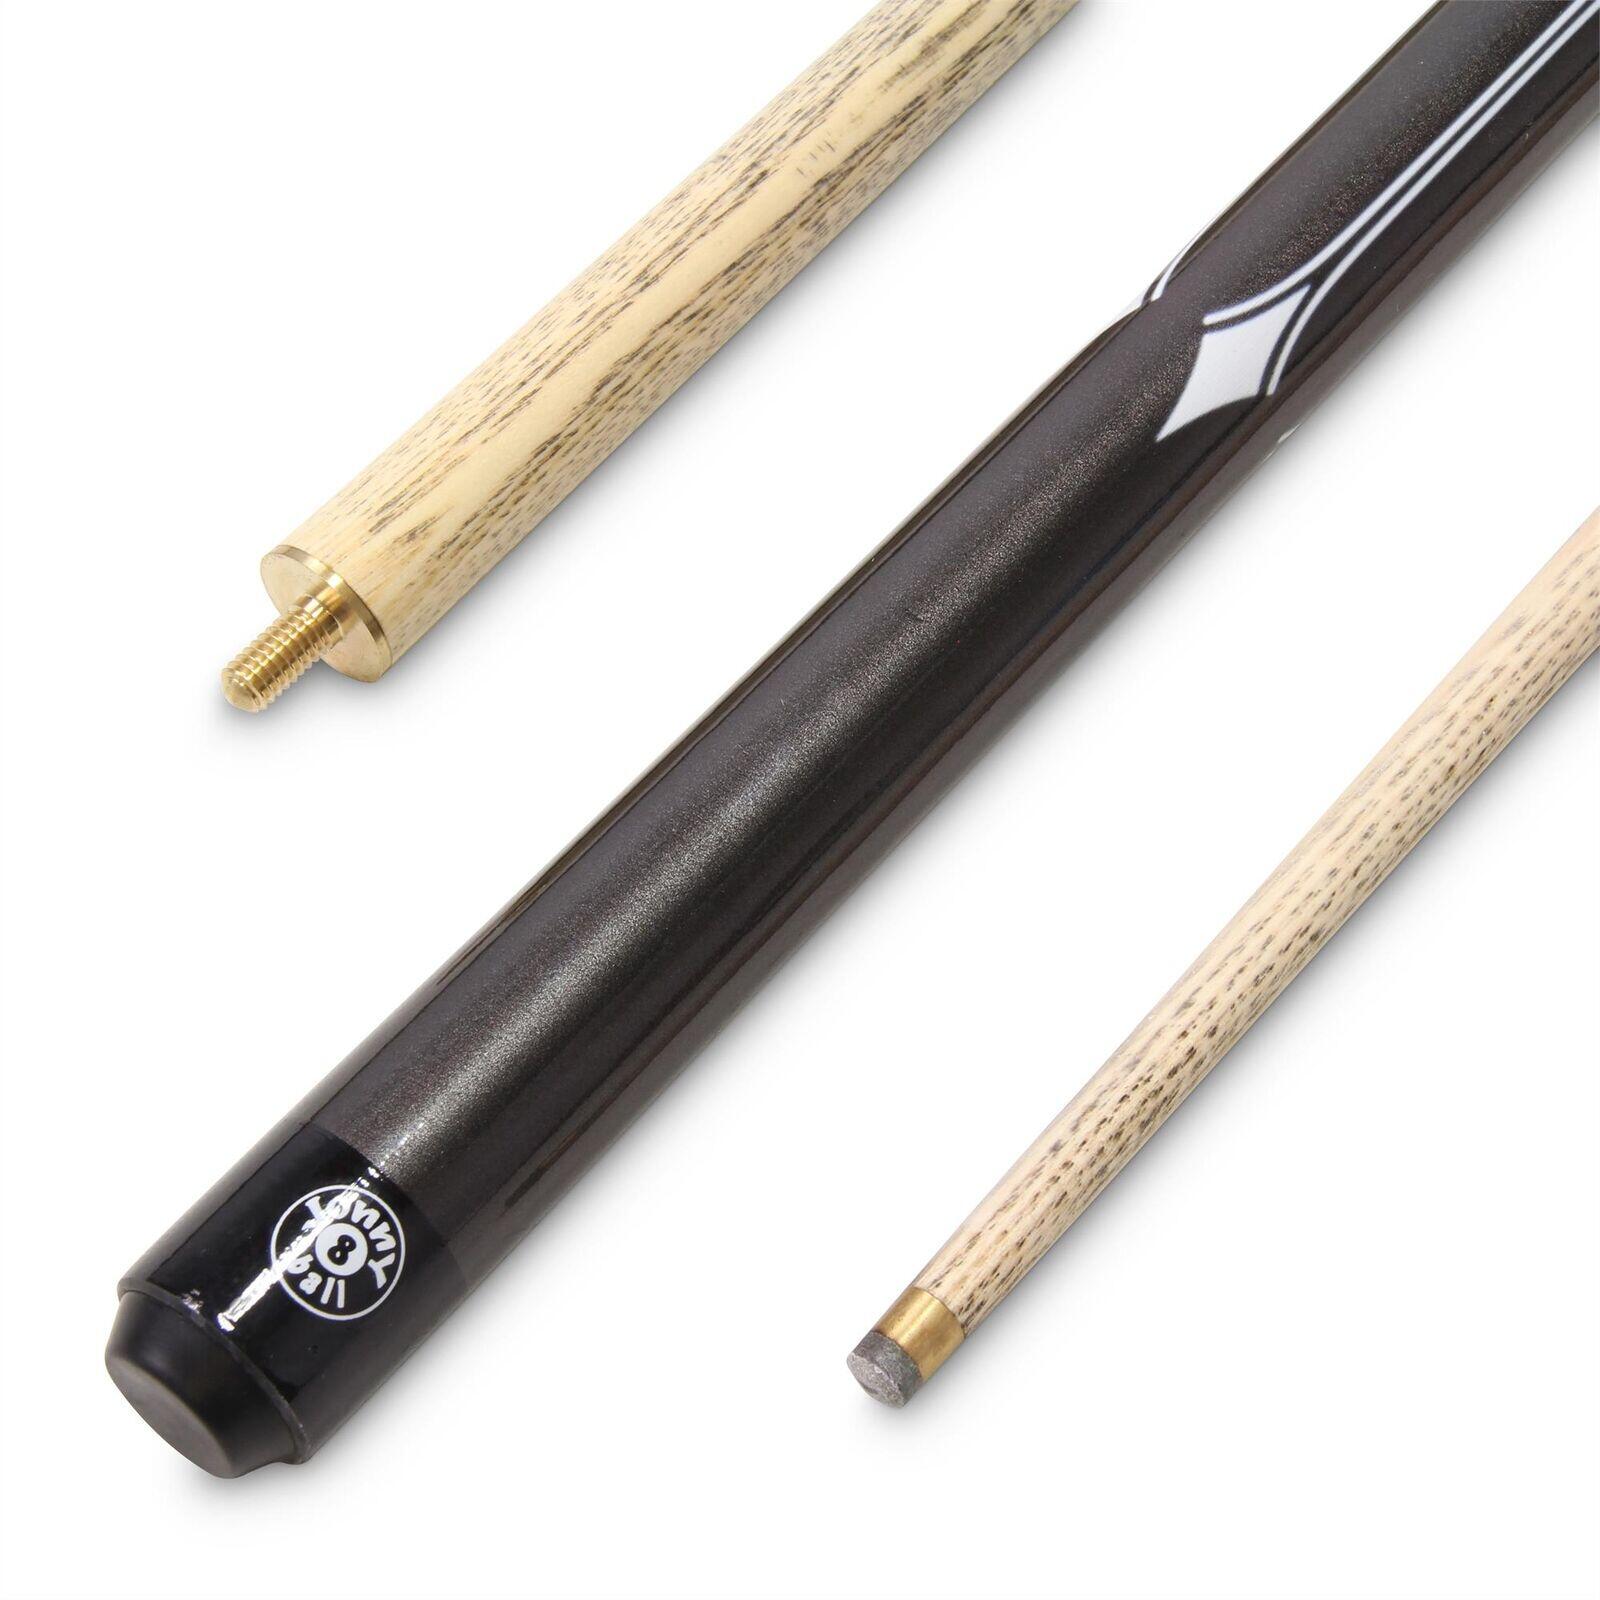 Jonny 8 Ball WHITE SPEAR 57 Inch 2 Piece Snooker Pool Cue with 9.5mm Tip 1/7